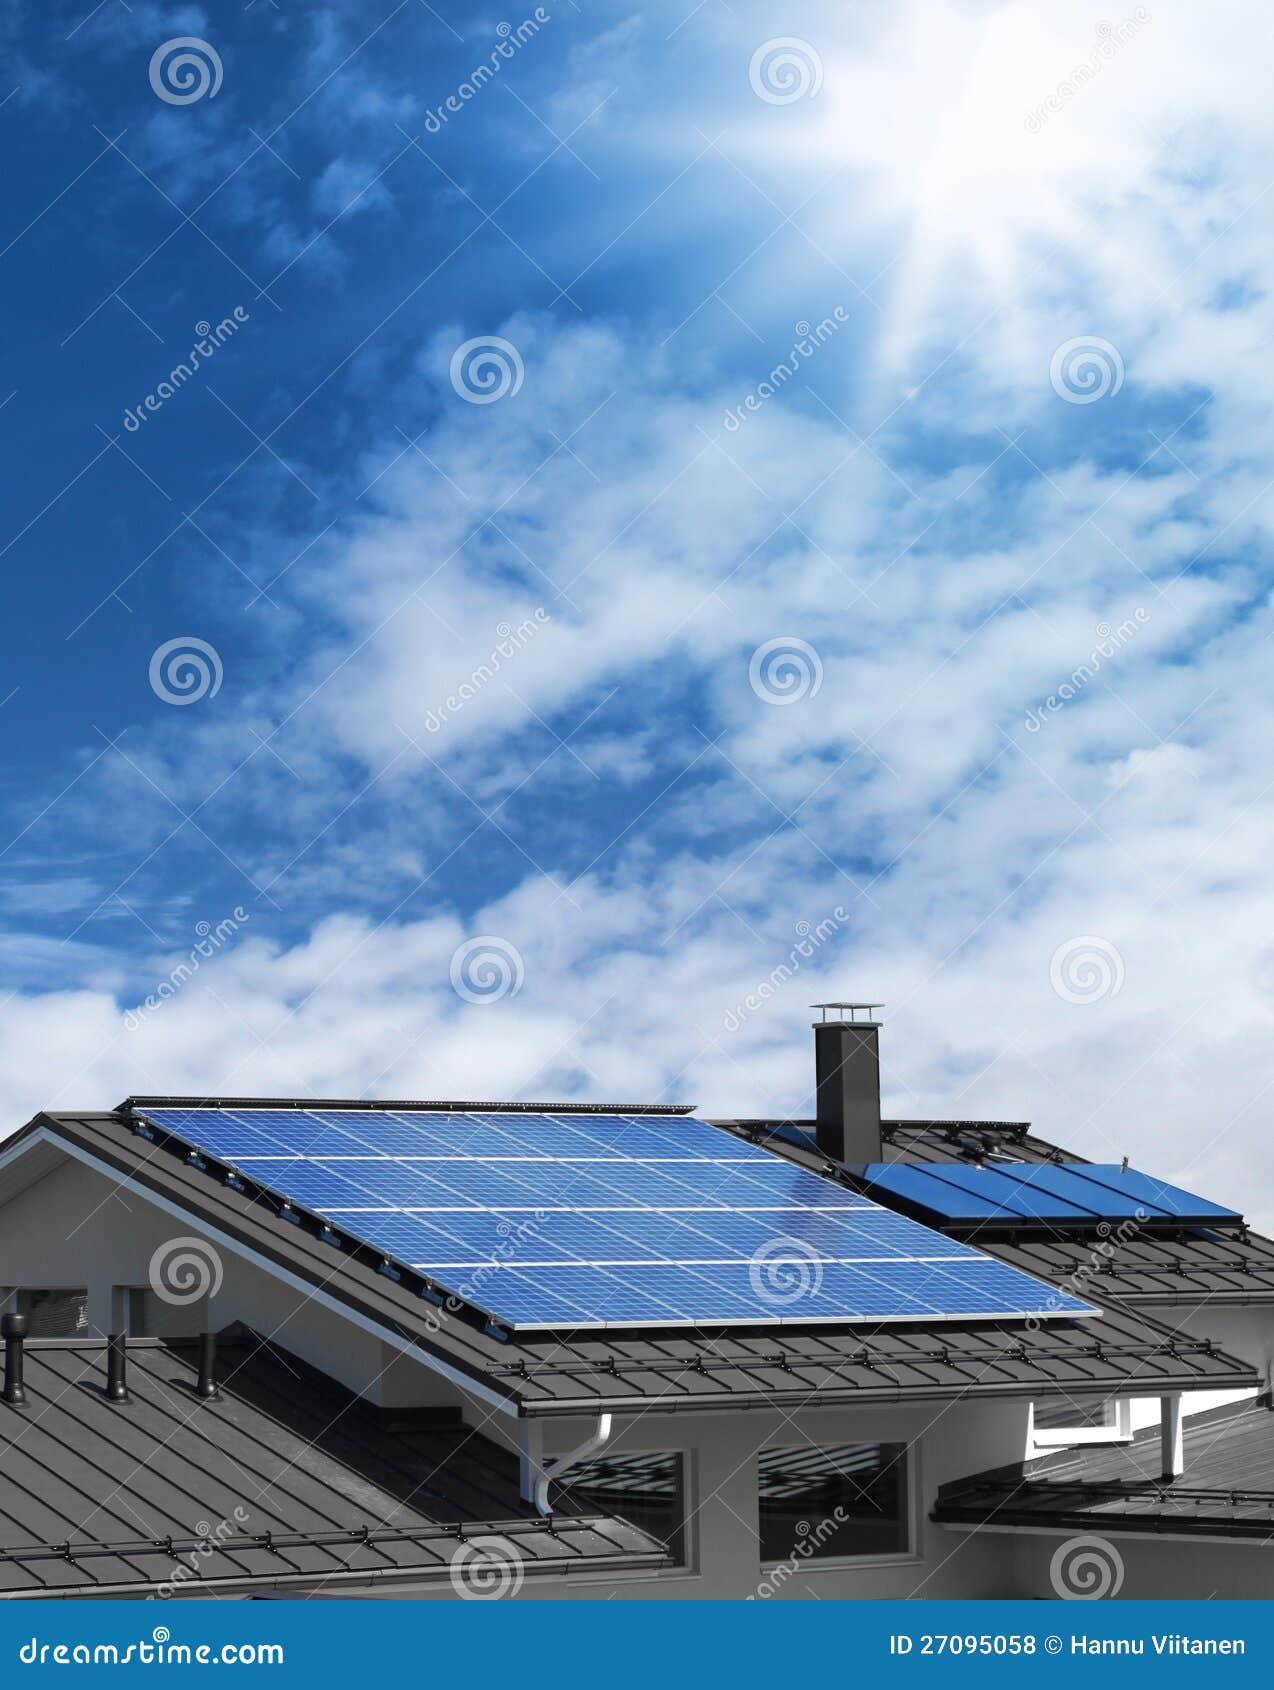 Solar Panels On House Rooftop Royalty Free Stock Photos - Image 